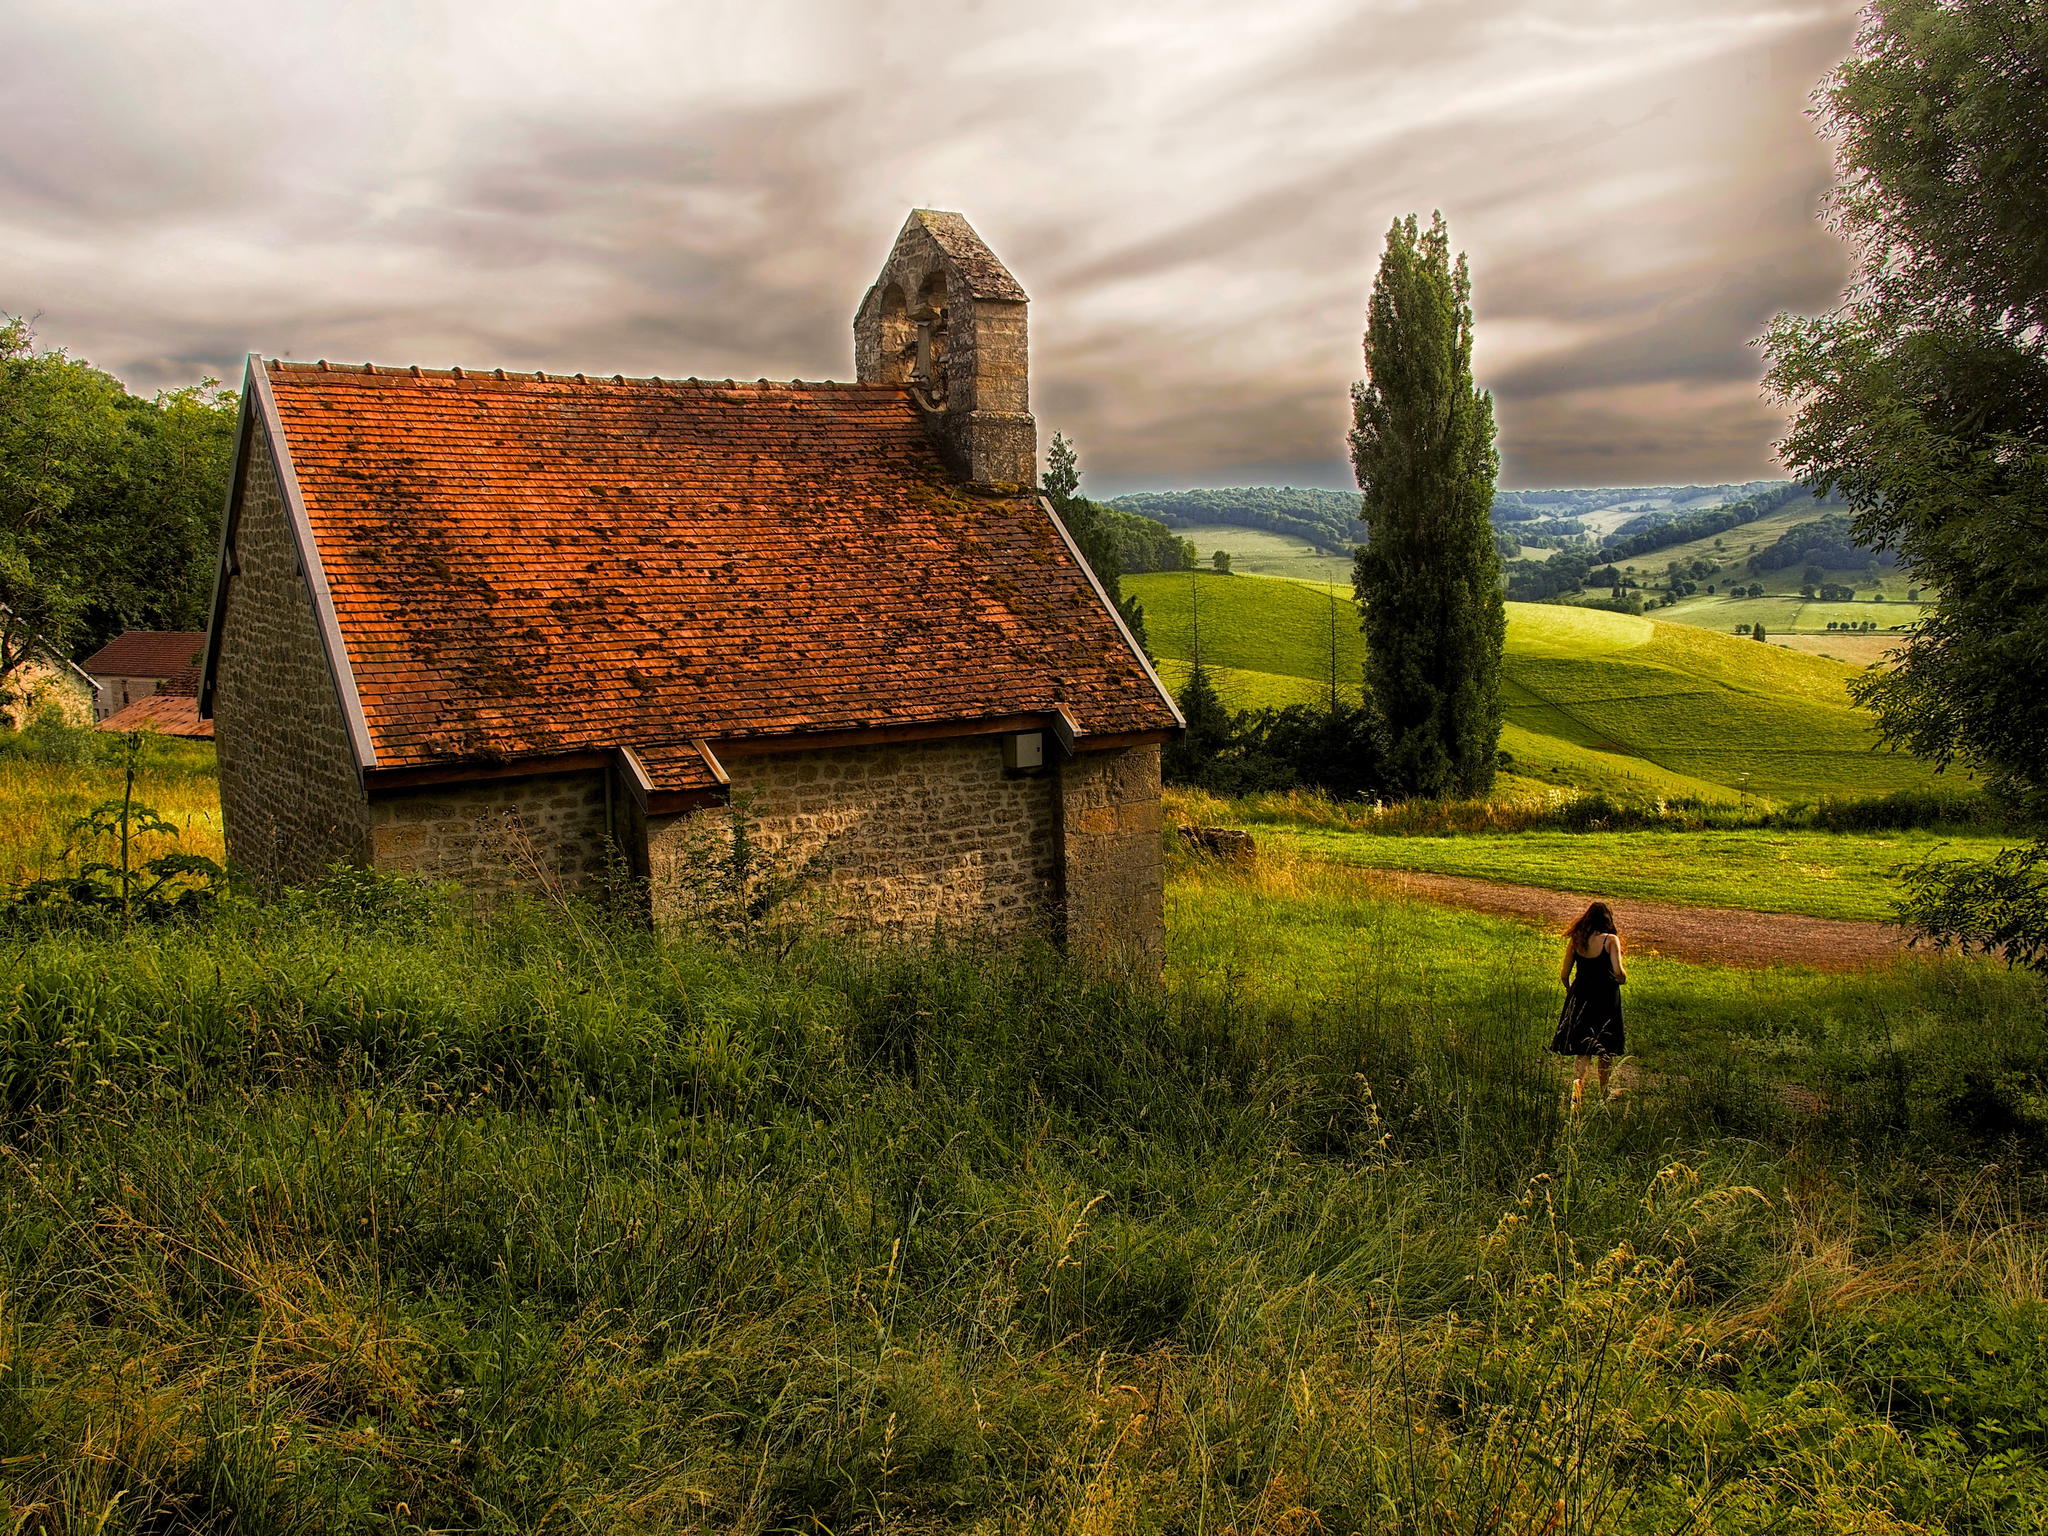 Chapel and Woman by Marty Gervais